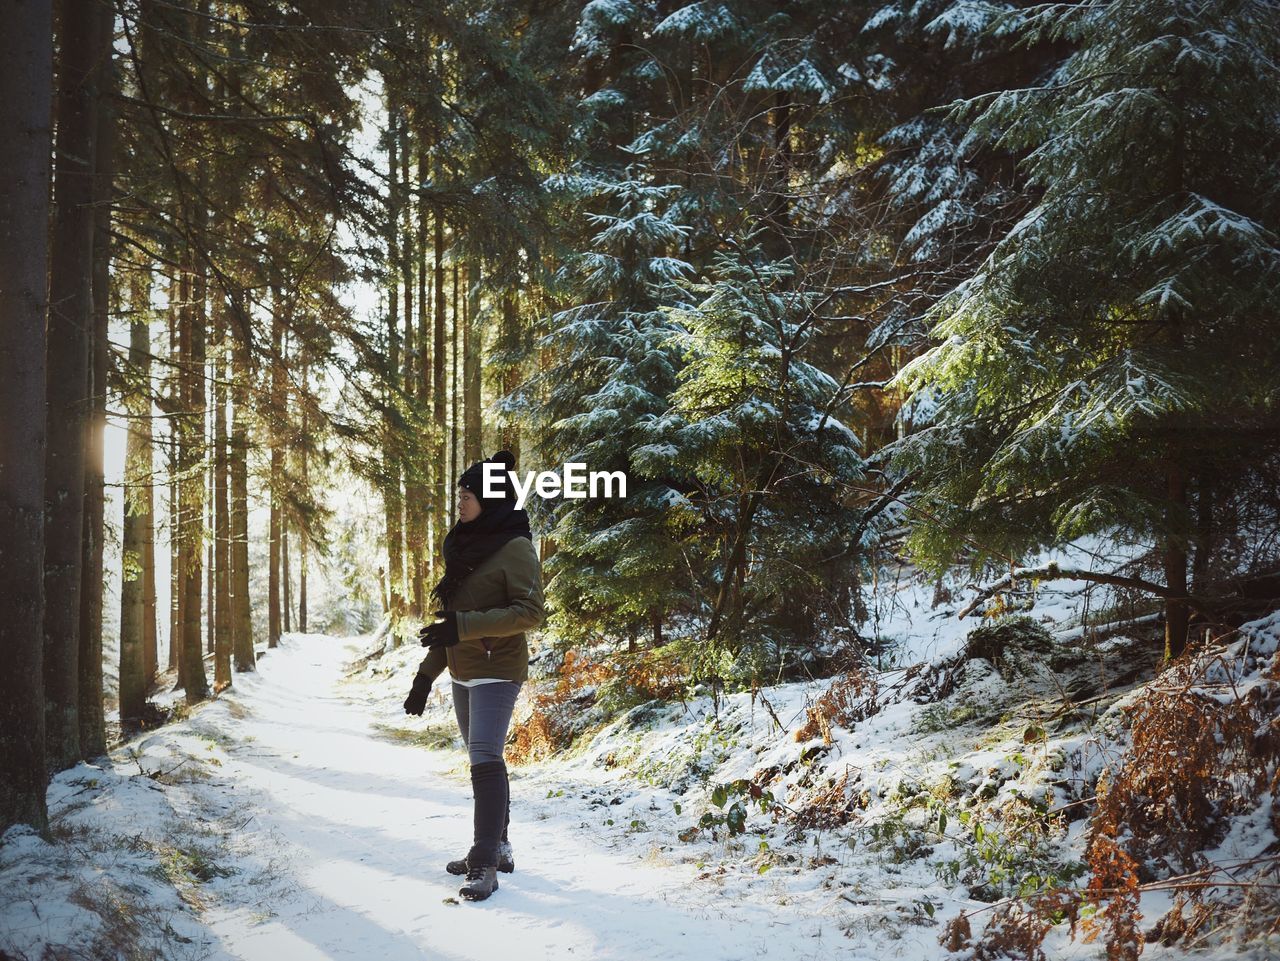 Woman looking away while standing amidst trees in forest during winter